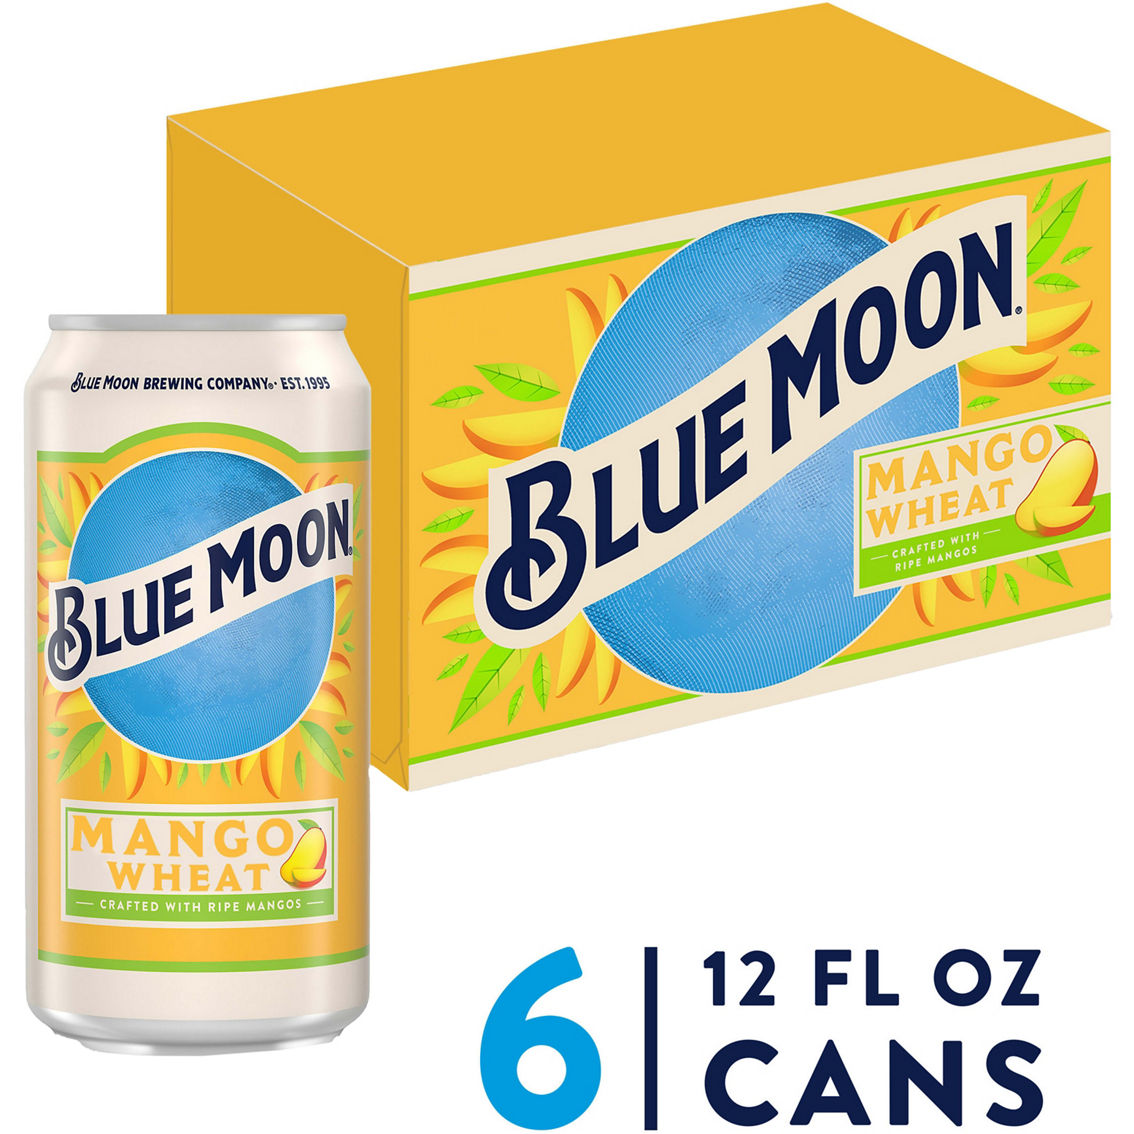 Blue Moon Mango Wheat Ale Beer 6 pk., 12 oz. Cans - Image 2 of 2